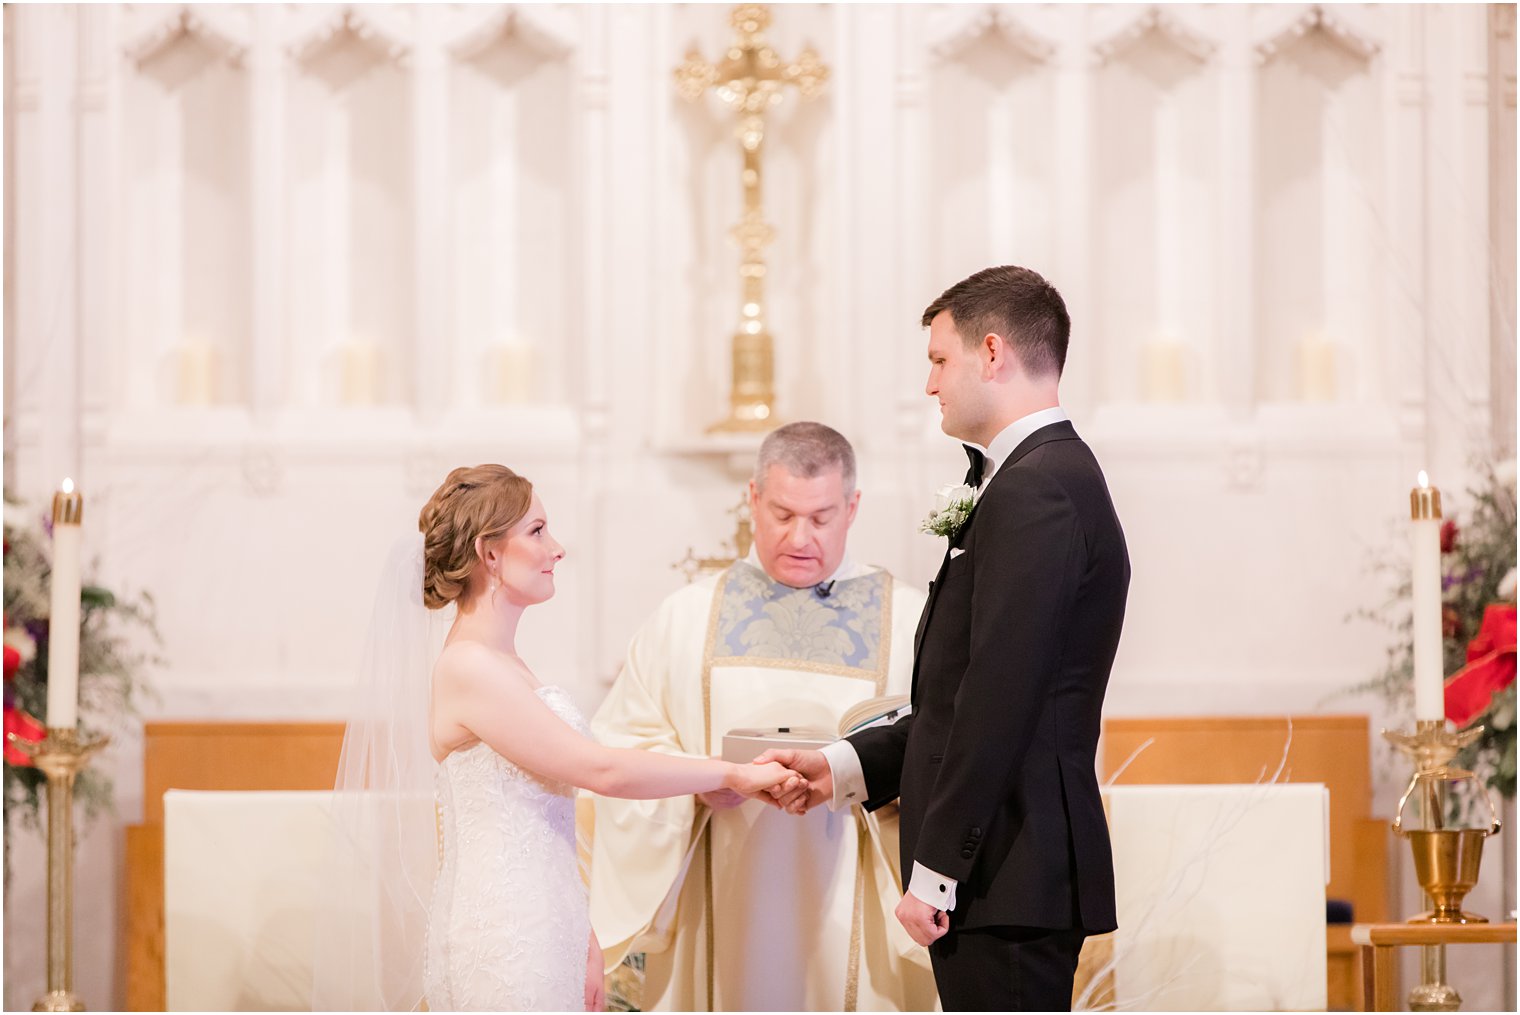 Bride and groom exchanging rings at St. Peter the Apostle in New Brunswick NJ